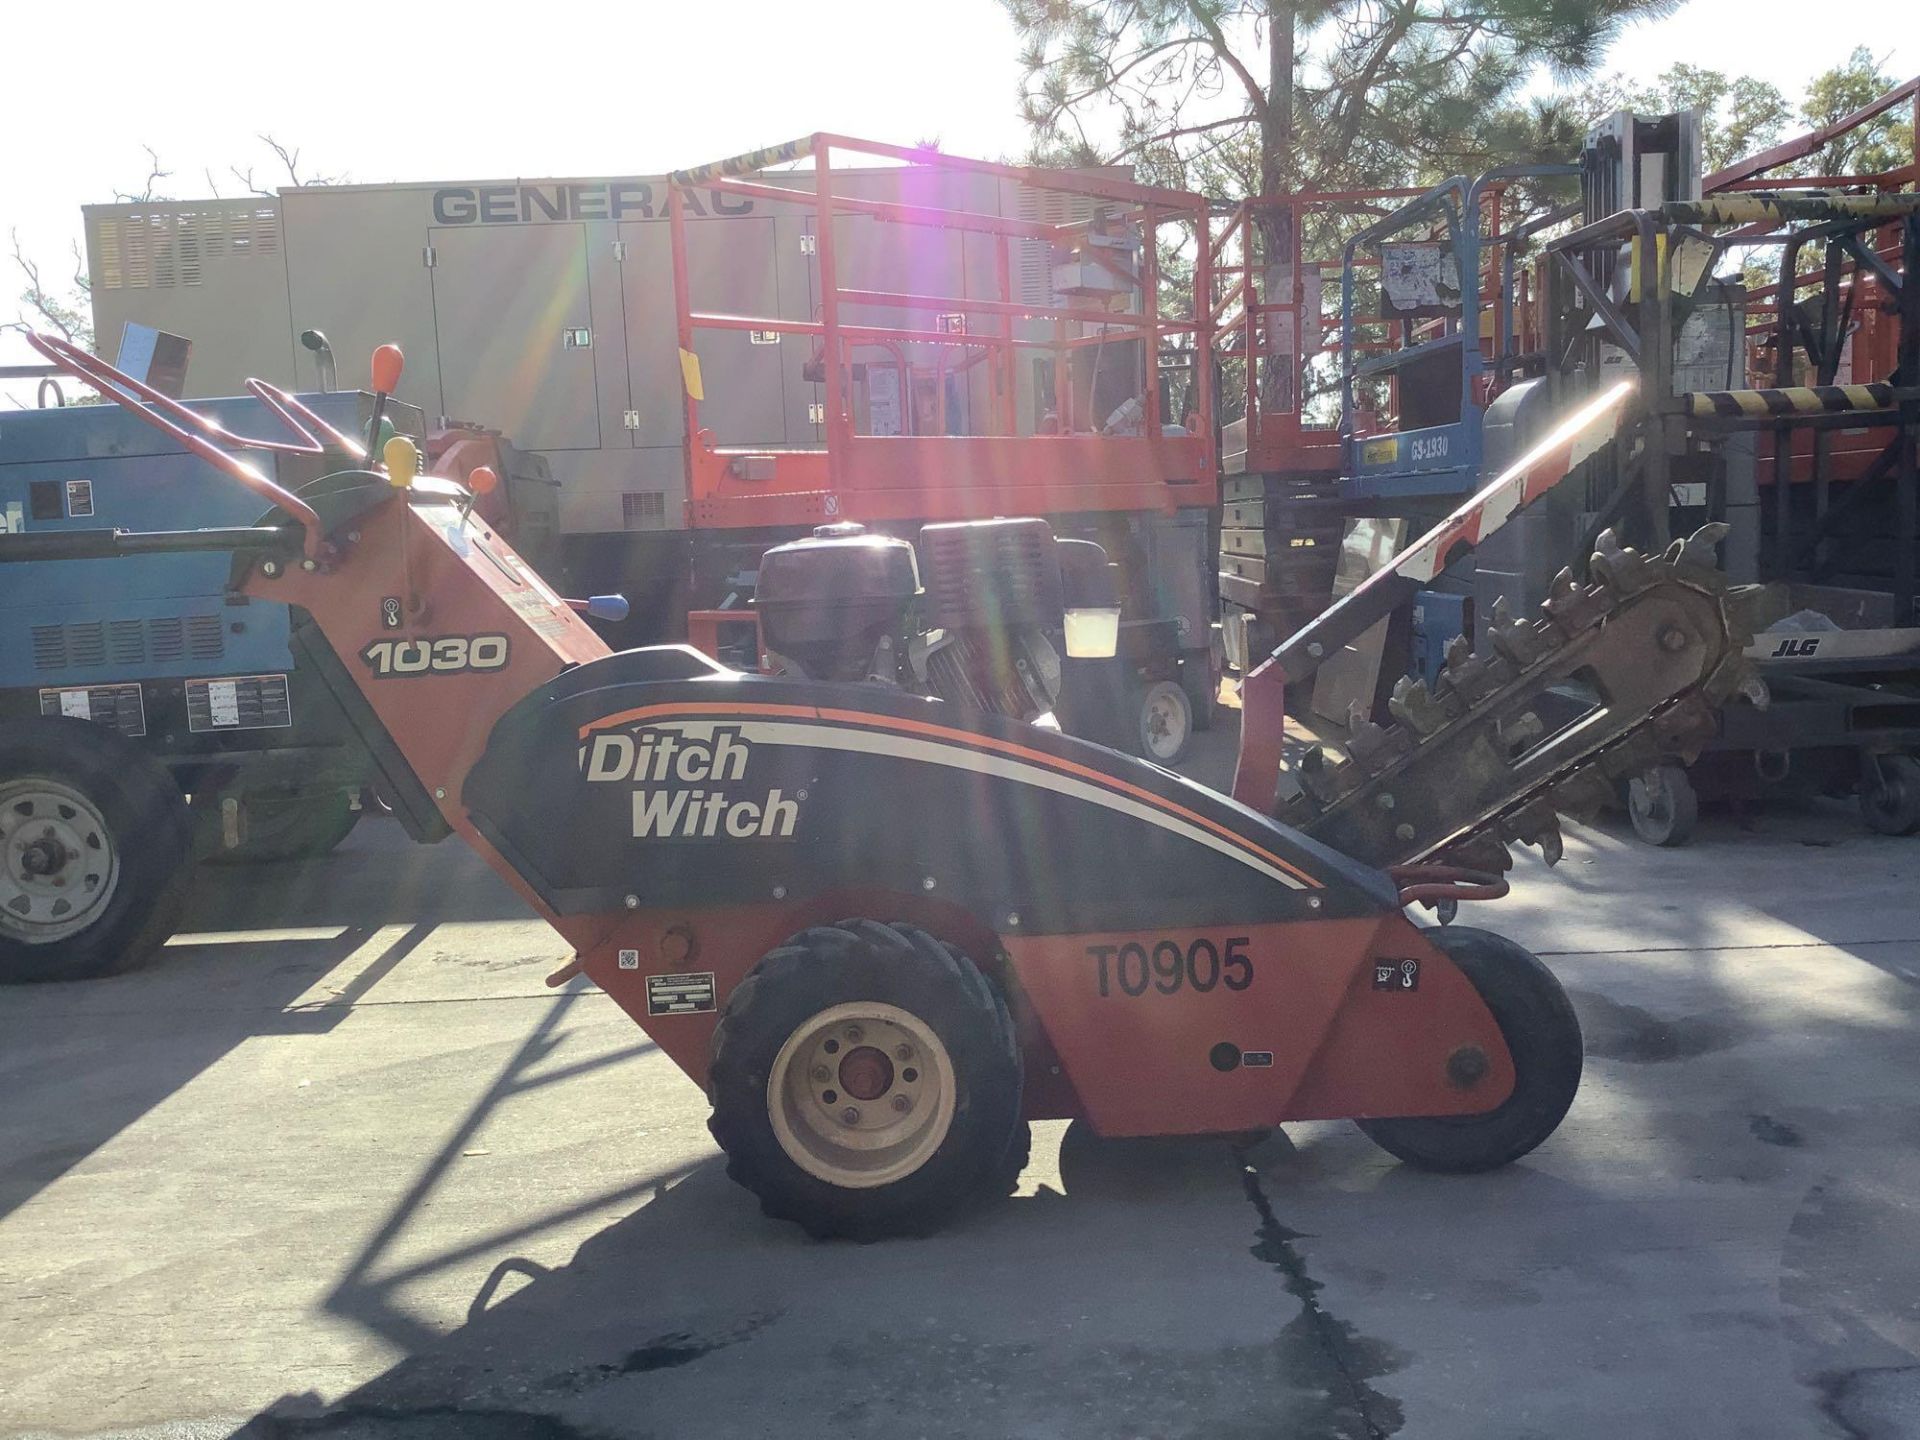 DITCH WITCH WALK BEHIND TRENCHER MODEL 1030, GAS POWERED, RUNS & OPERATES - Image 7 of 11